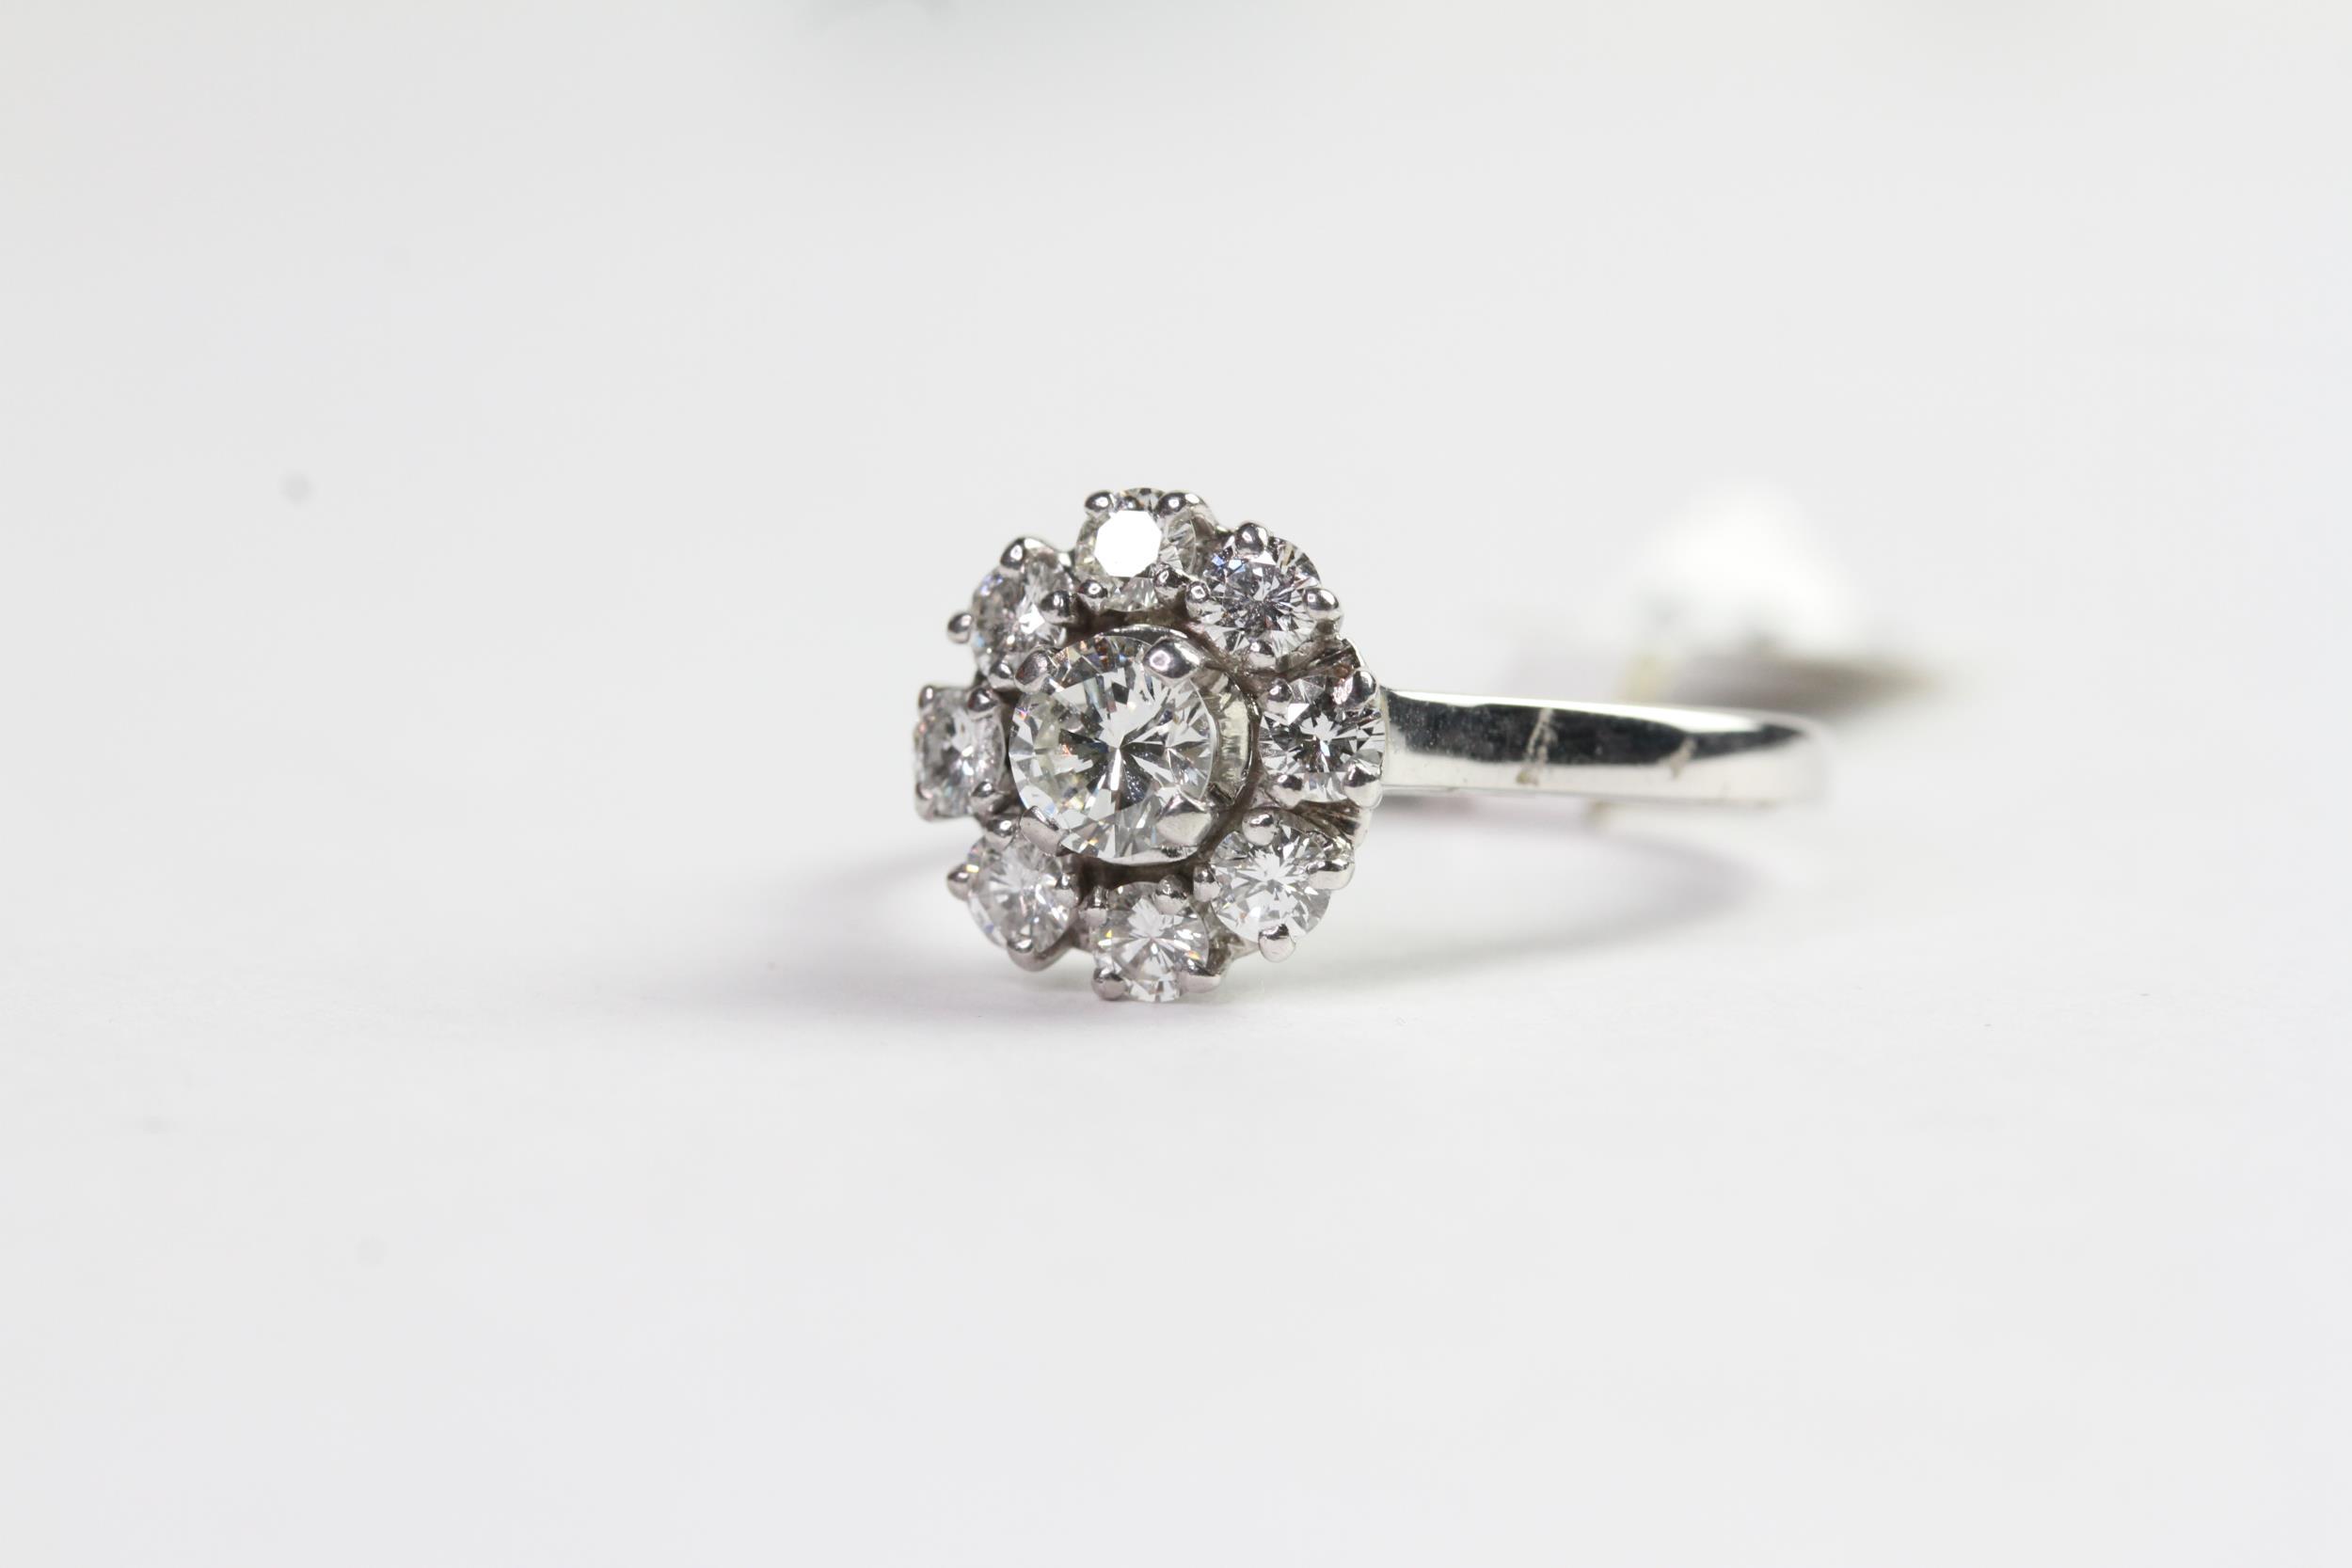 1.01ct Diamond Cluster Ring with center brilliant cut diamond surrounded by eight further - Image 2 of 2